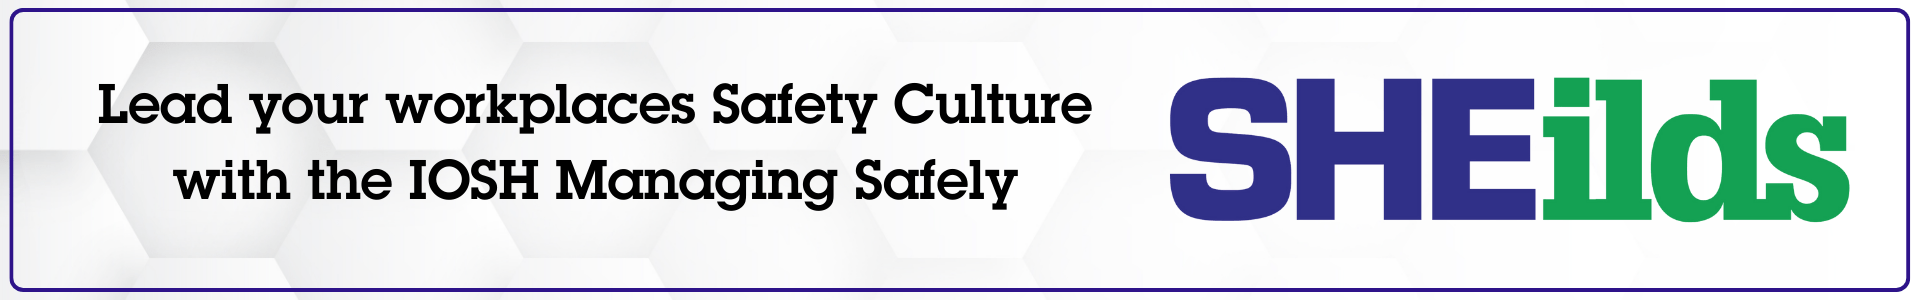 Lead your workplaces Safety Culture with the IOSH Managing Safely